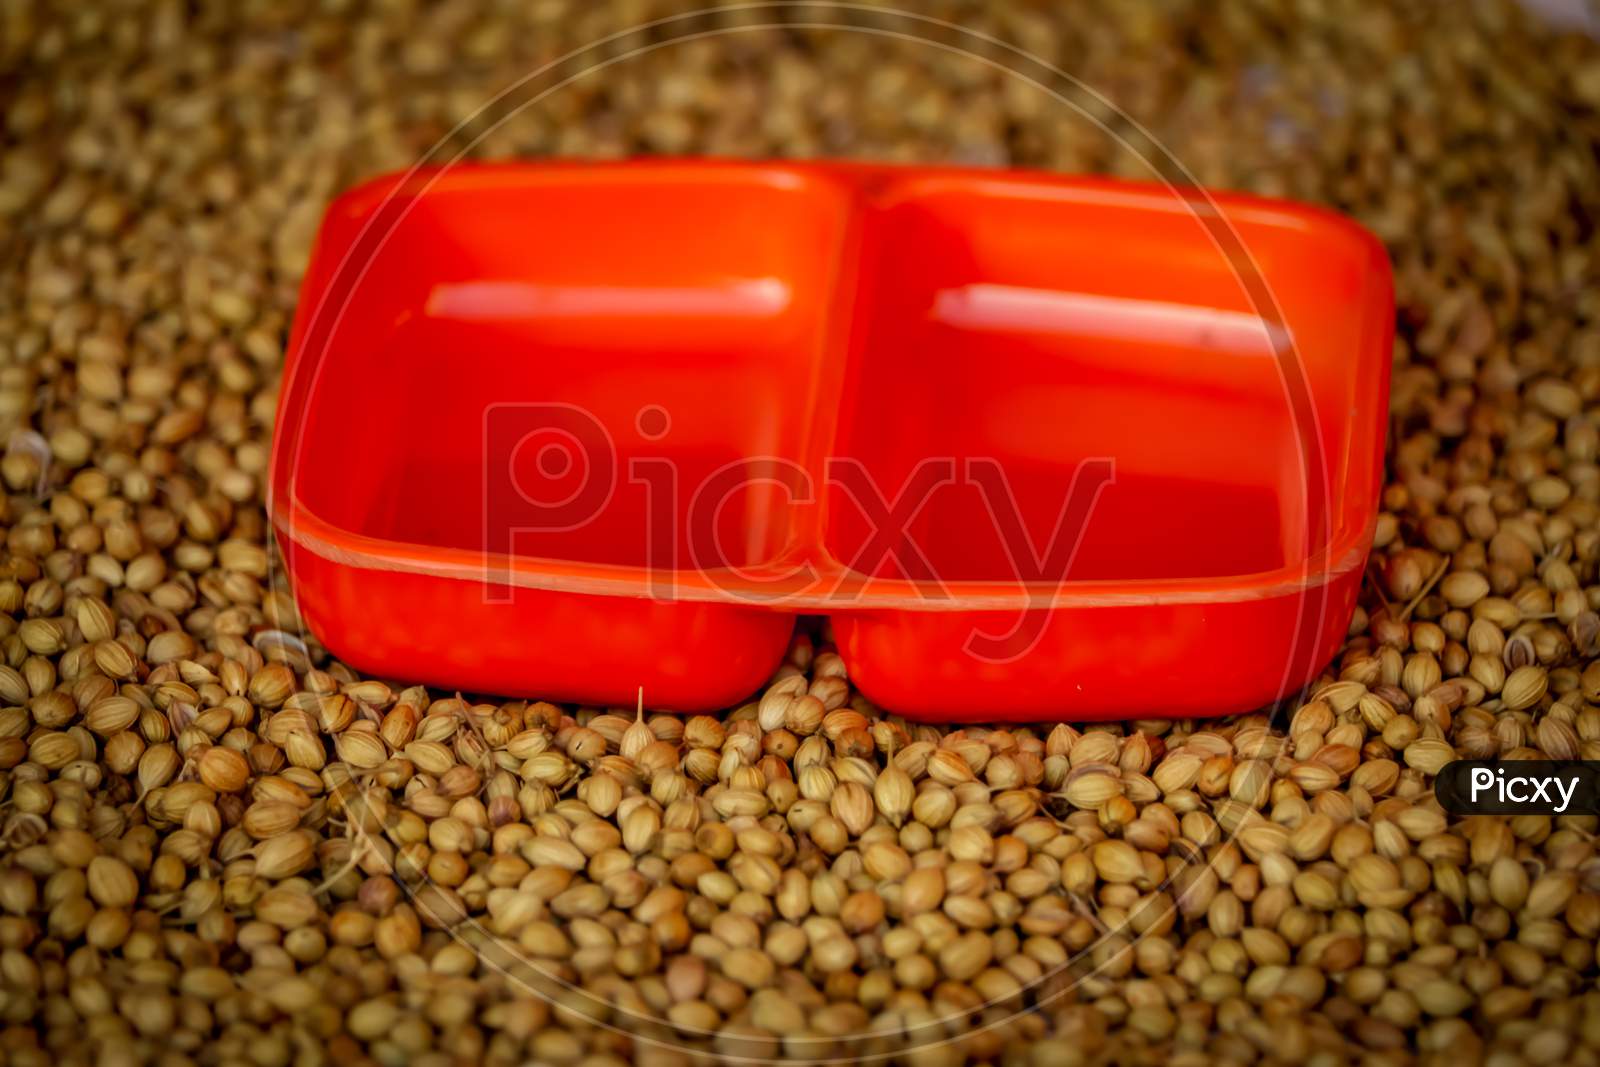 Coriander Seeds In A Big Wooden Bowl, Coriander Seeds And Wooden Spoon Beautiful Footage,Raw Organic Coriander Seeds In A Bowl,Selective Focus On Subject,Dried Coriander Seed Bowl